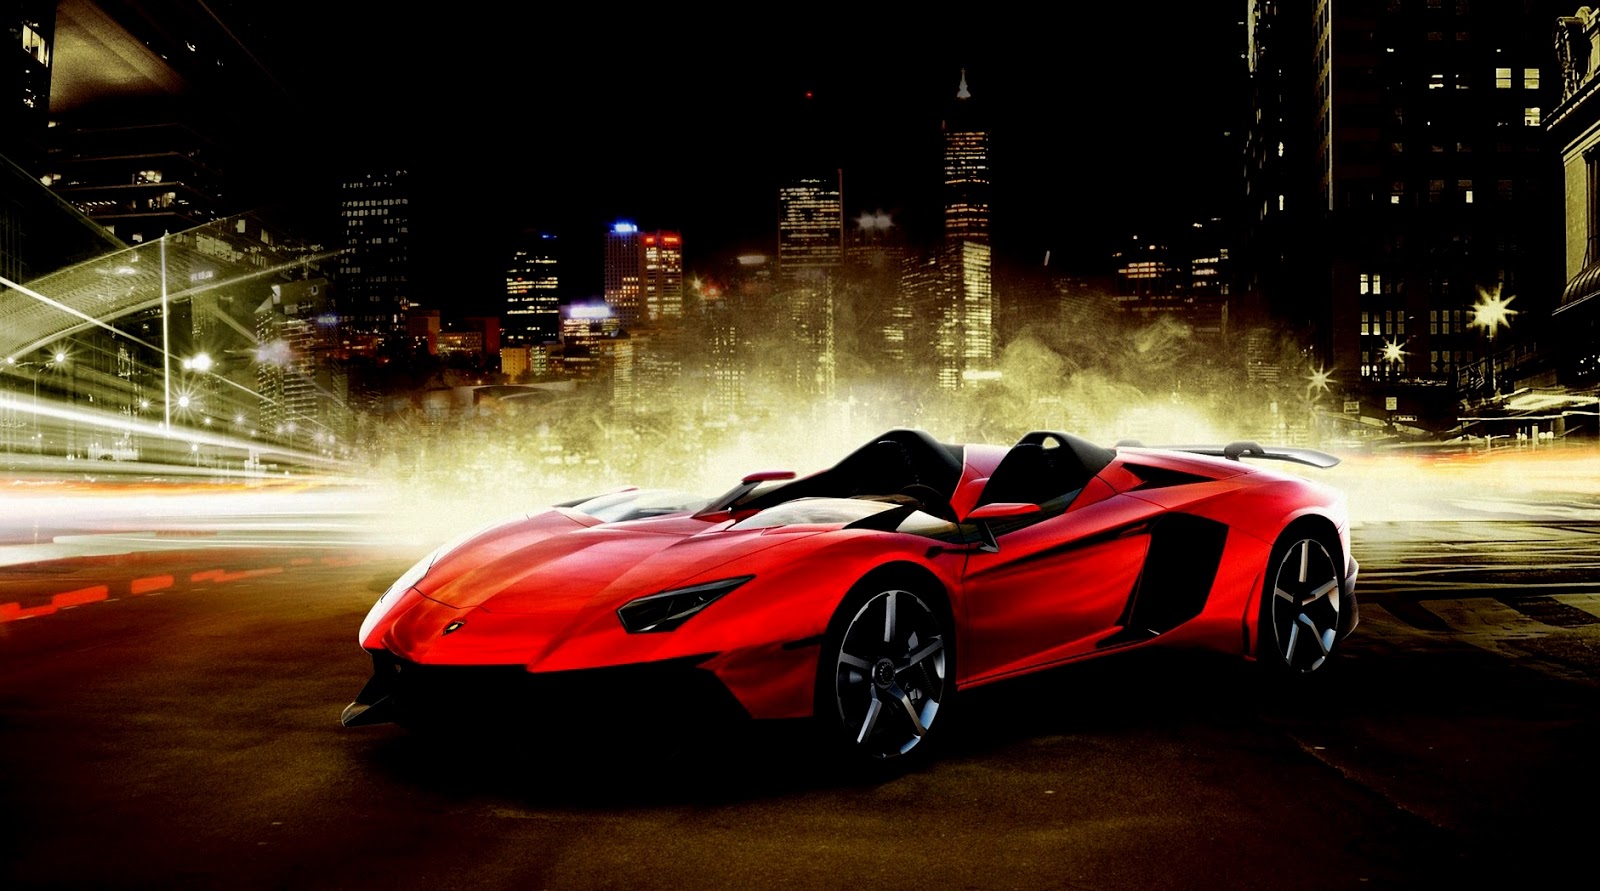 Cars picture, Cars image, Cars photo hd, Cars background, Cars desktop 